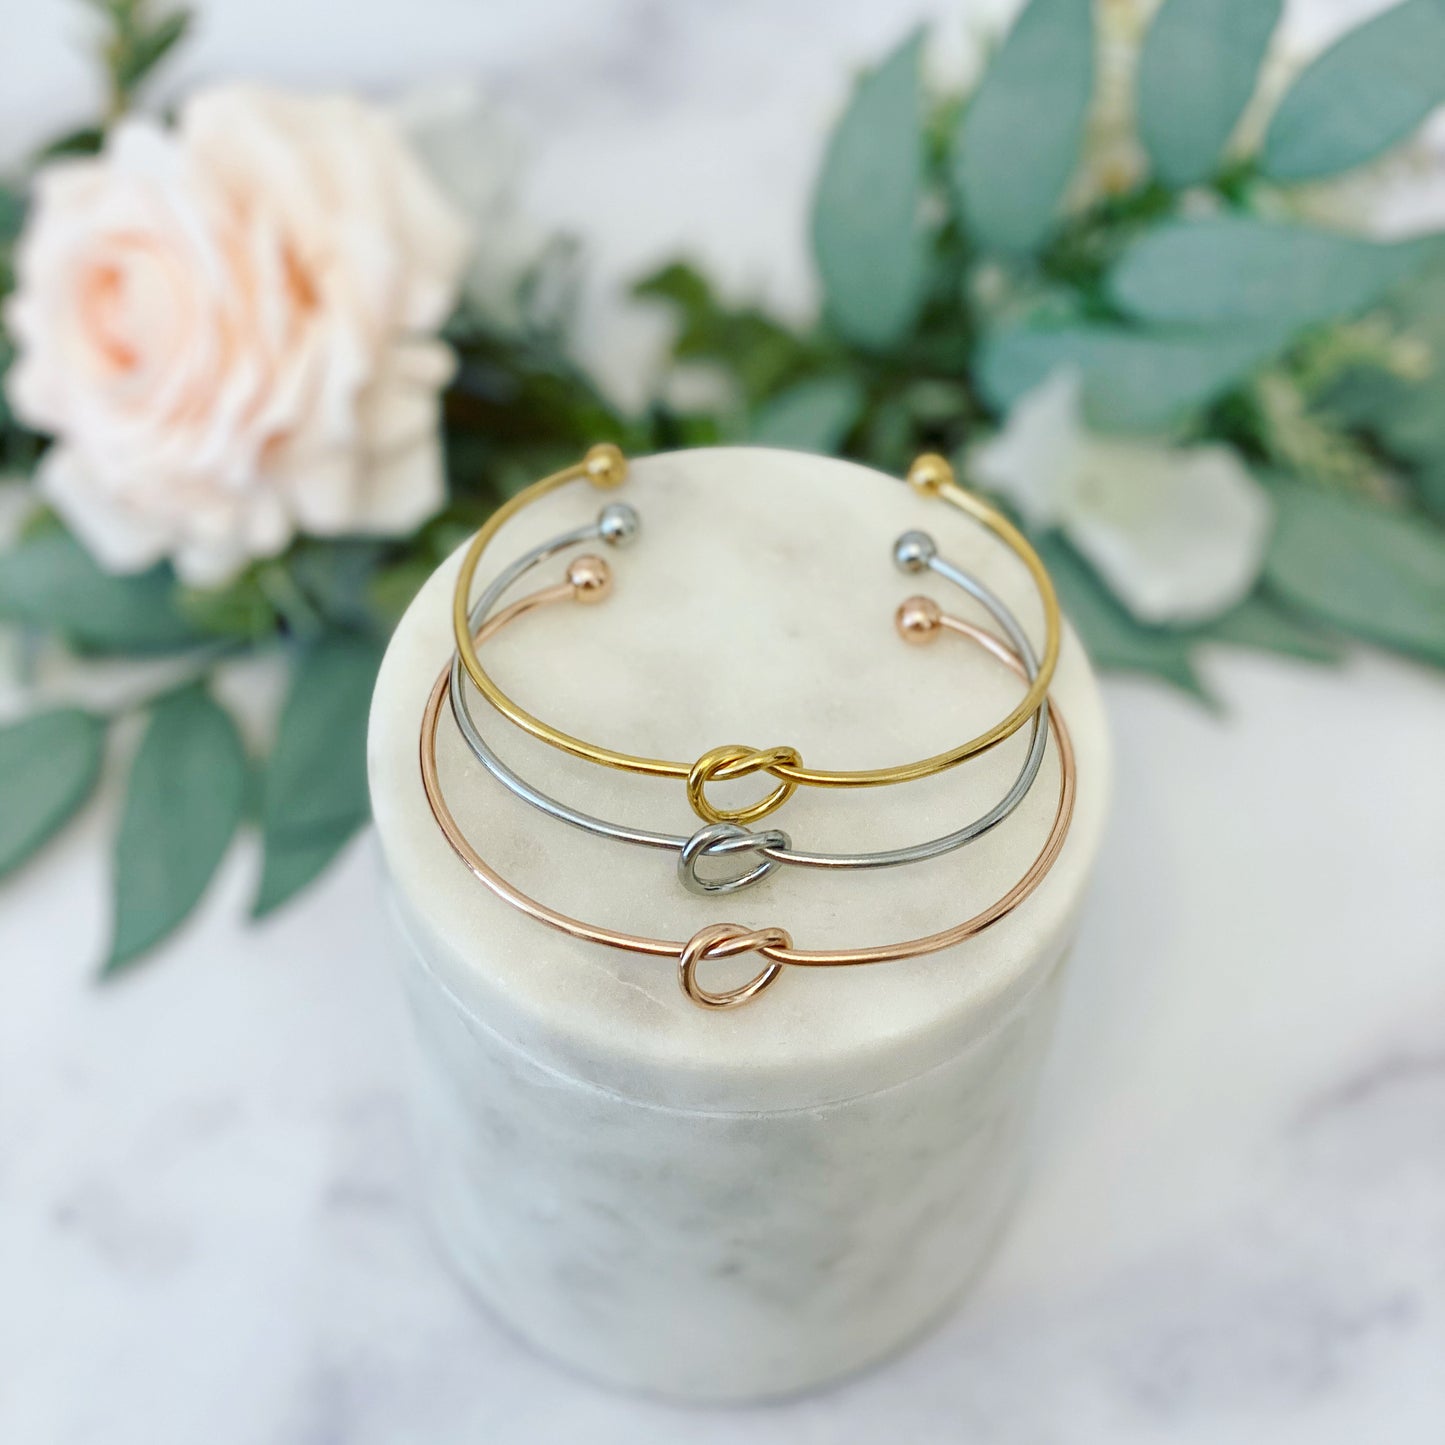 Can't Say "I Do" Without You! Knot Bangles